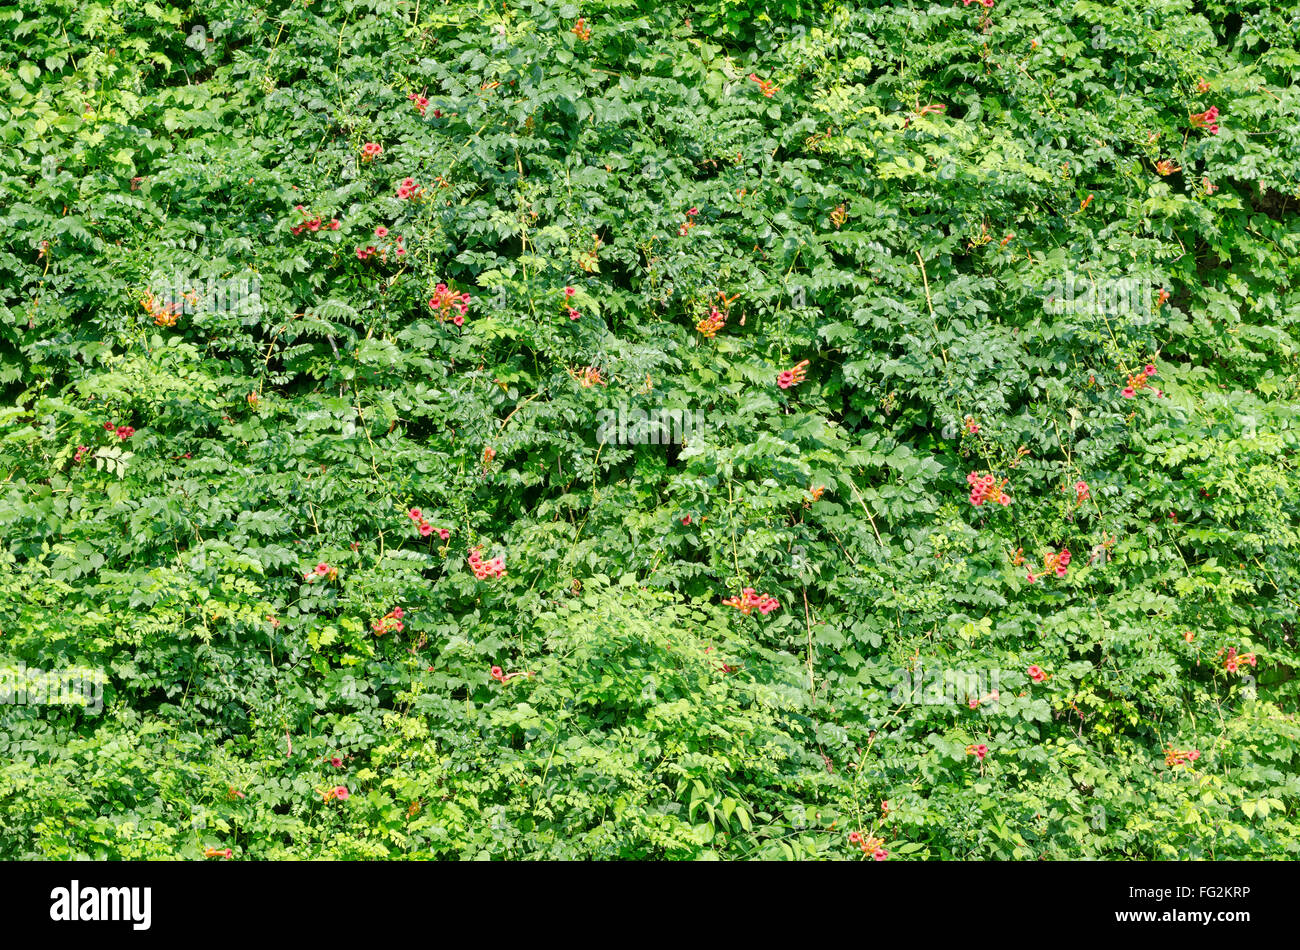 Green Fence of Leaves with Red Flowers Stock Photo